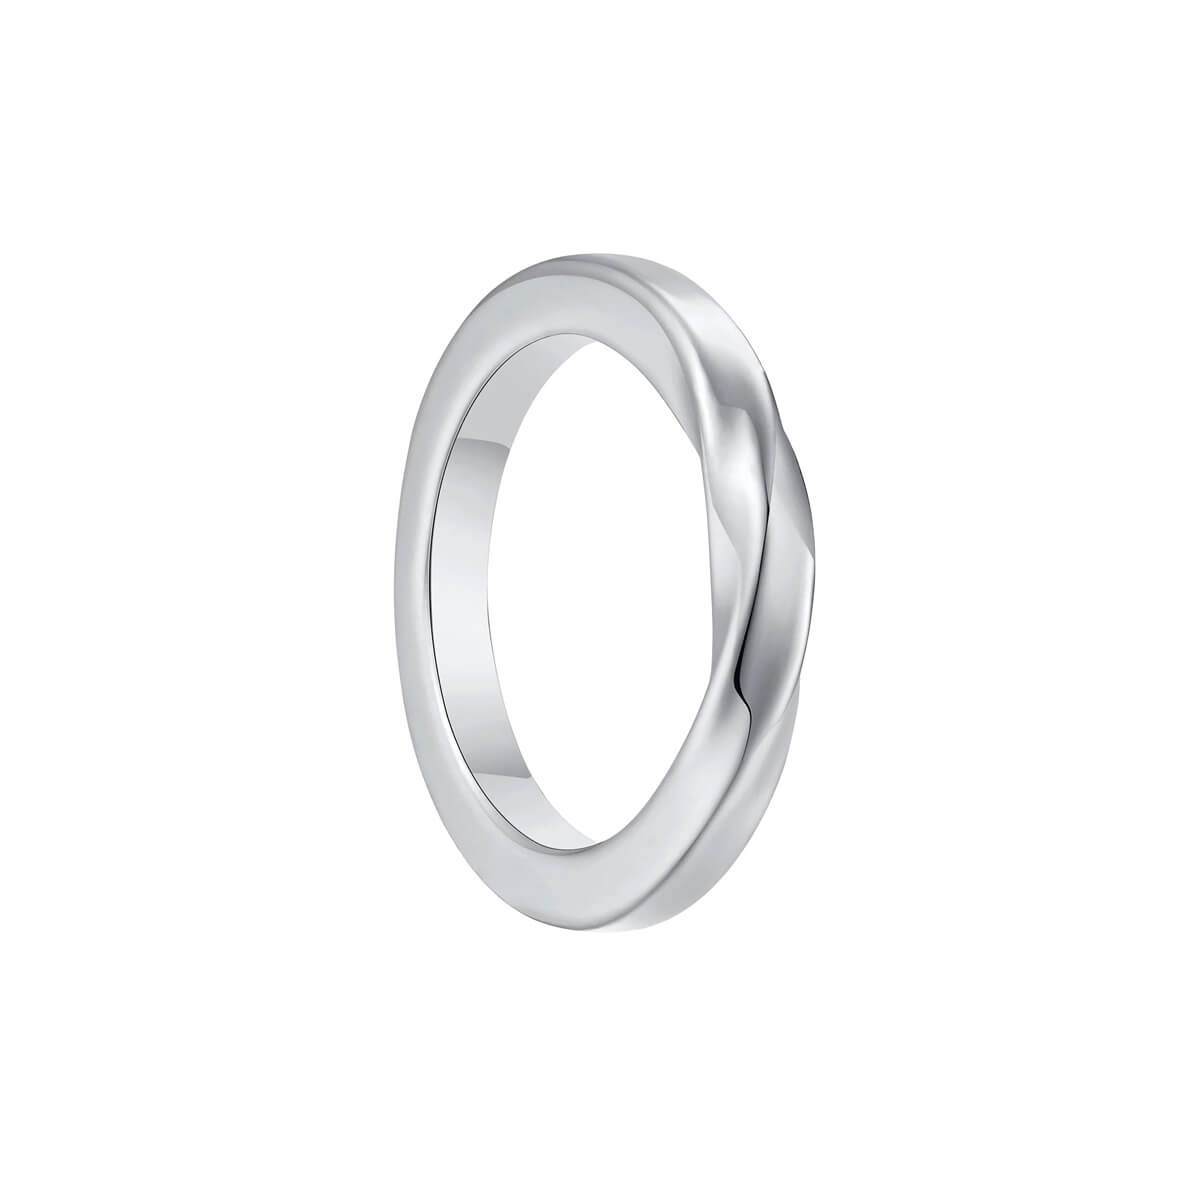 Strong twisted steel ring (Steel 316L)